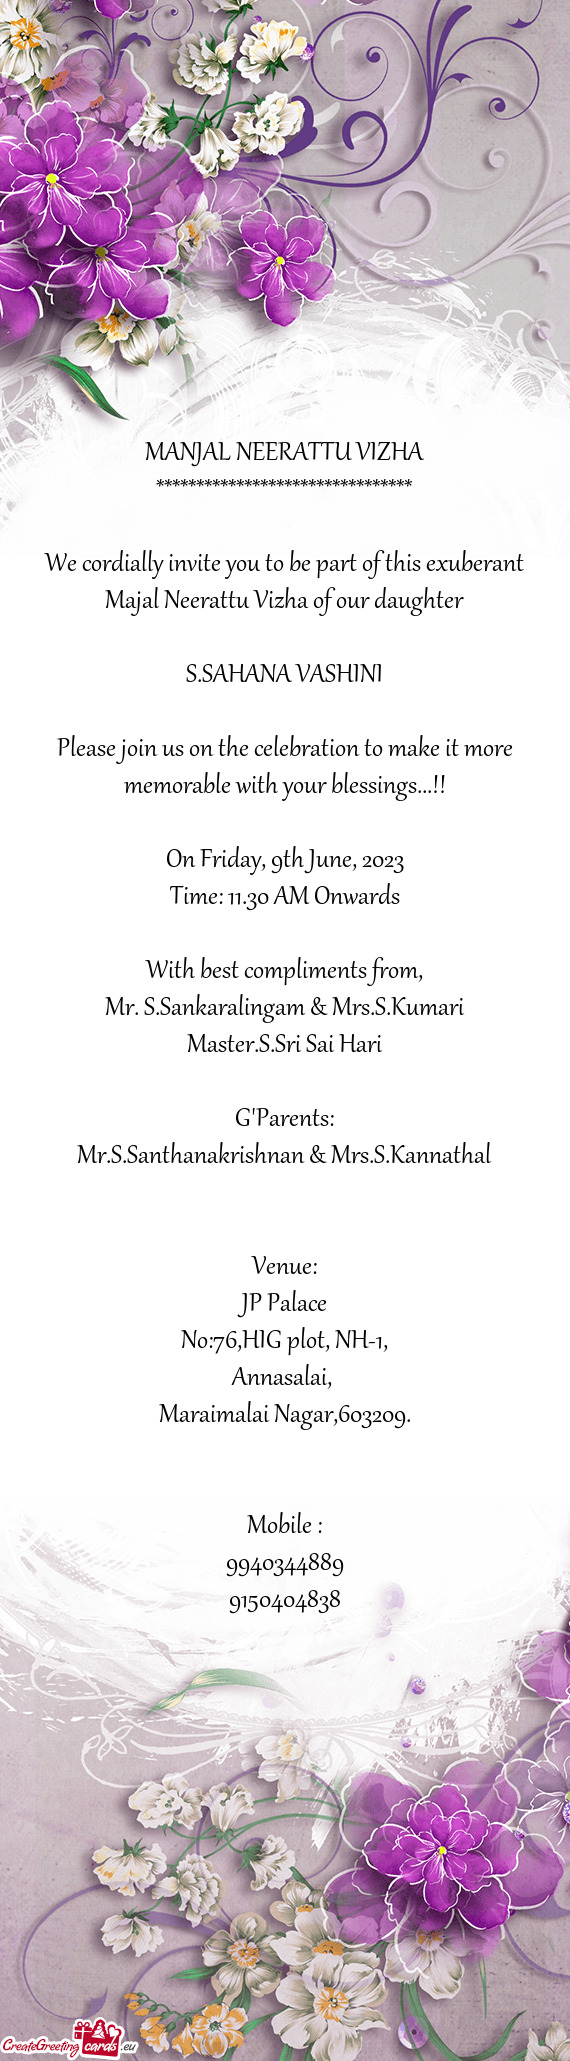 We cordially invite you to be part of this exuberant Majal Neerattu Vizha of our daughter